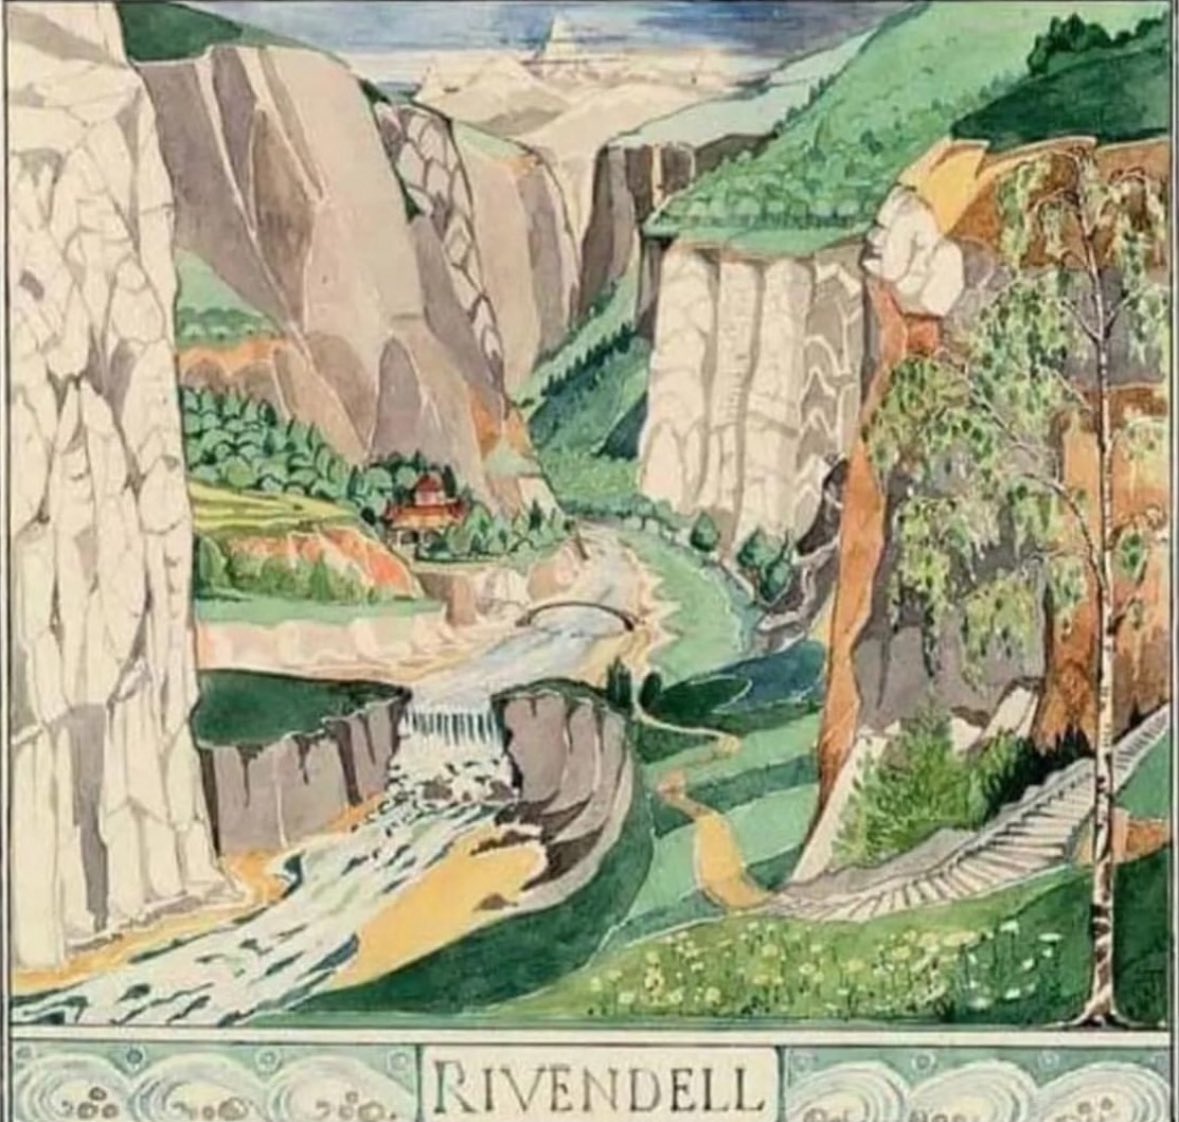 JRR Tolkien’s “The fair valley of ‘Rivendell’. His art is just as distinctive as his writing #fantasyart #lotr